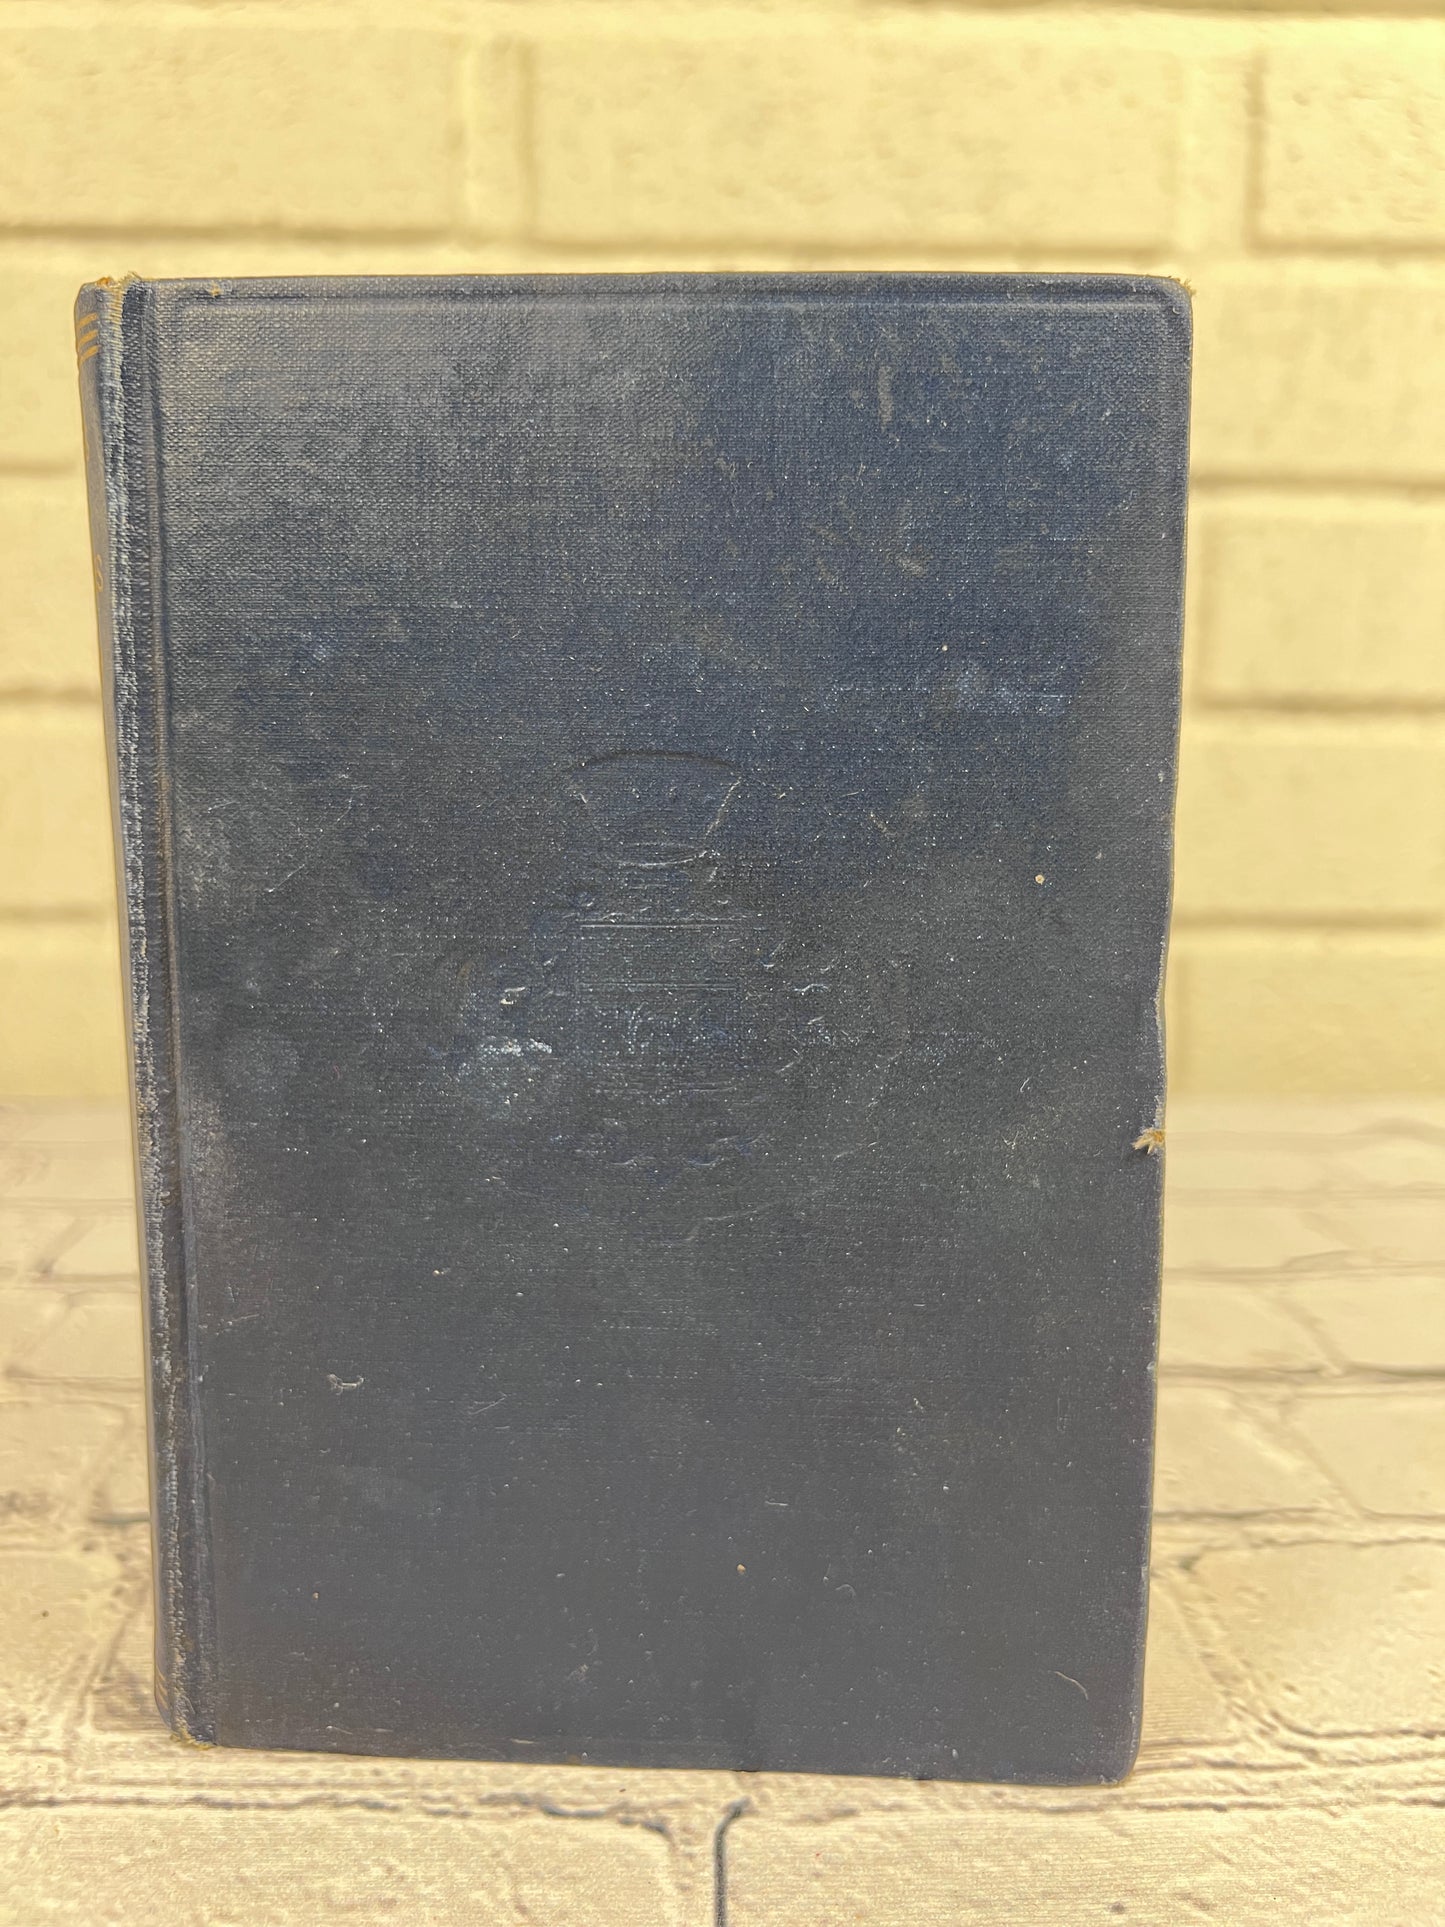 Les Miserables by Victor Hugo w/ intro, notes, vocab by Buffum [1909 · French]